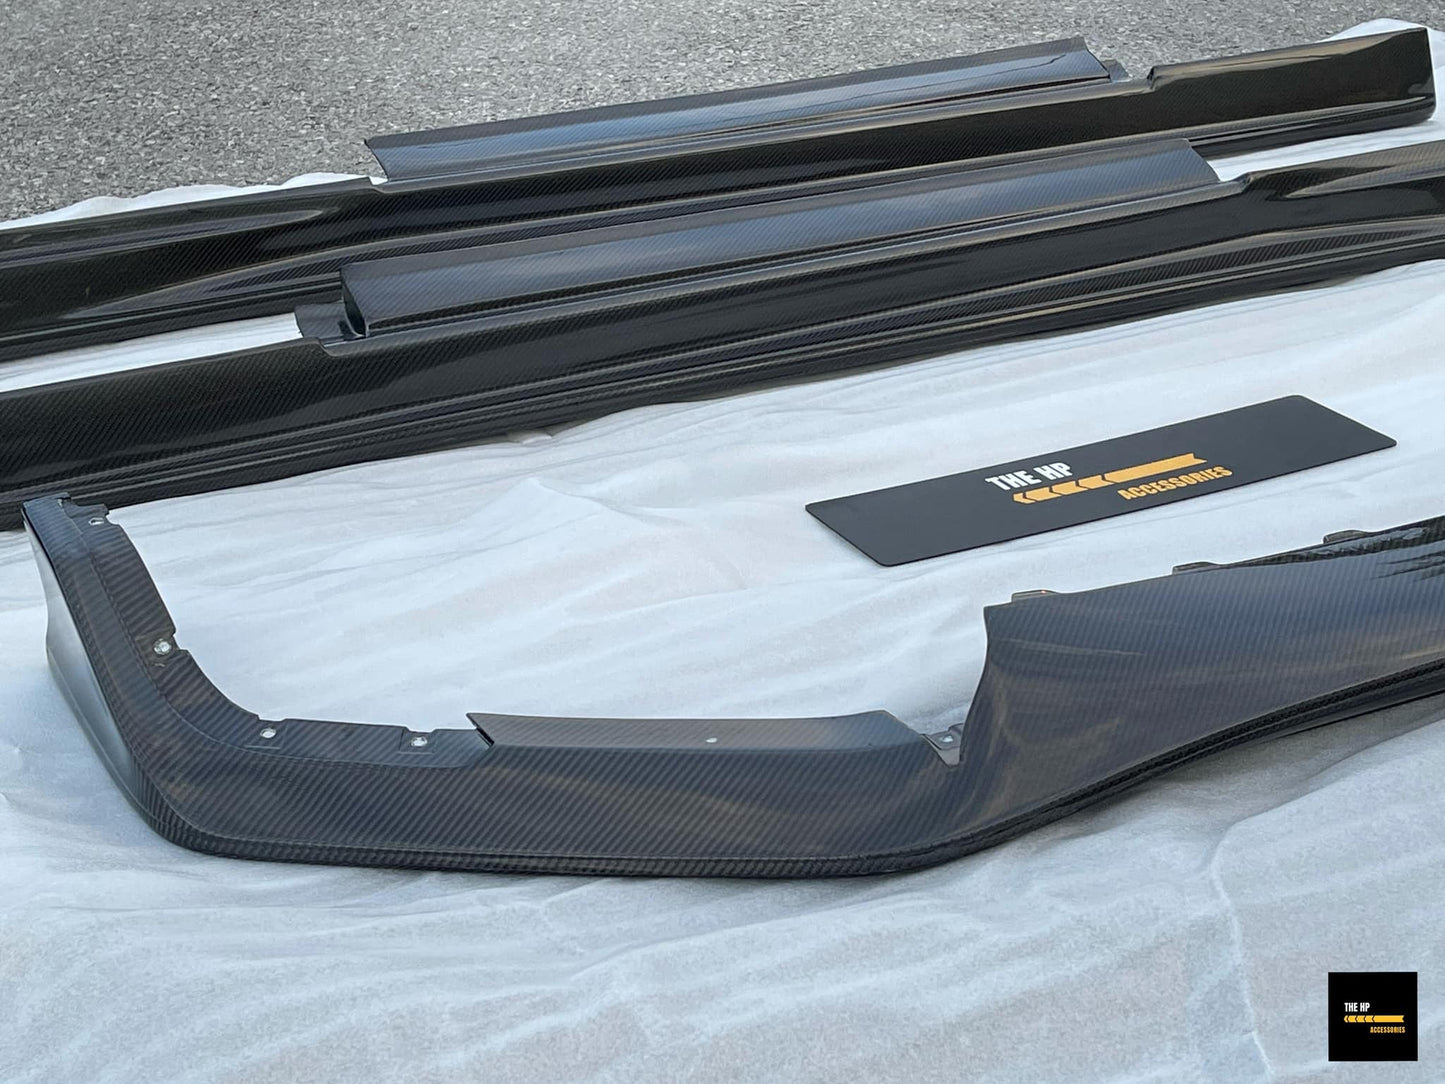 GTR 35 Nismo Carbon Front Lip & Nismo Carbon Side Skirt